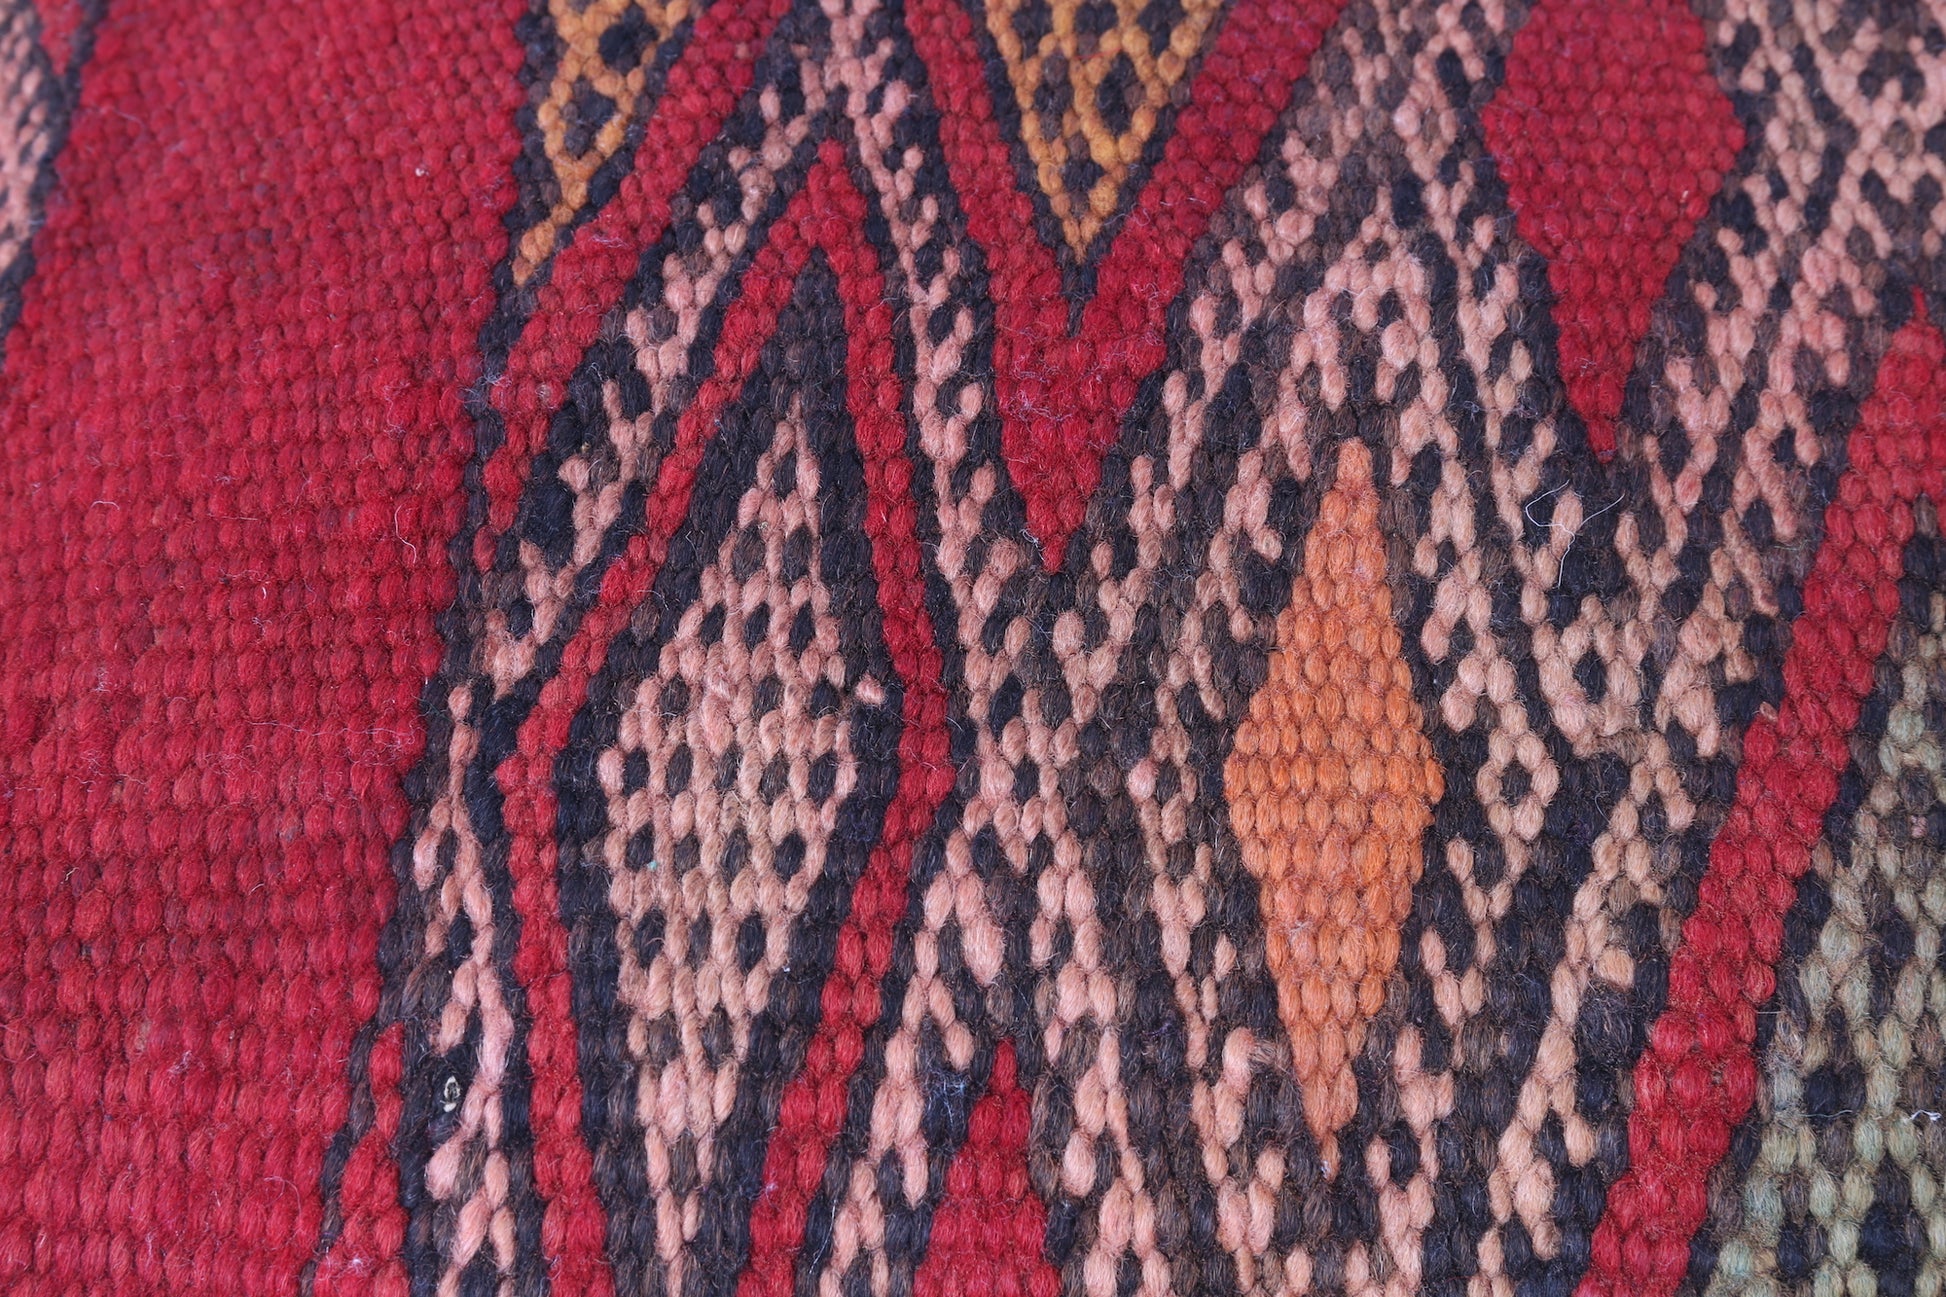 Vintage kilim Moroccan pillow 14.1 inches X 25.5 inches